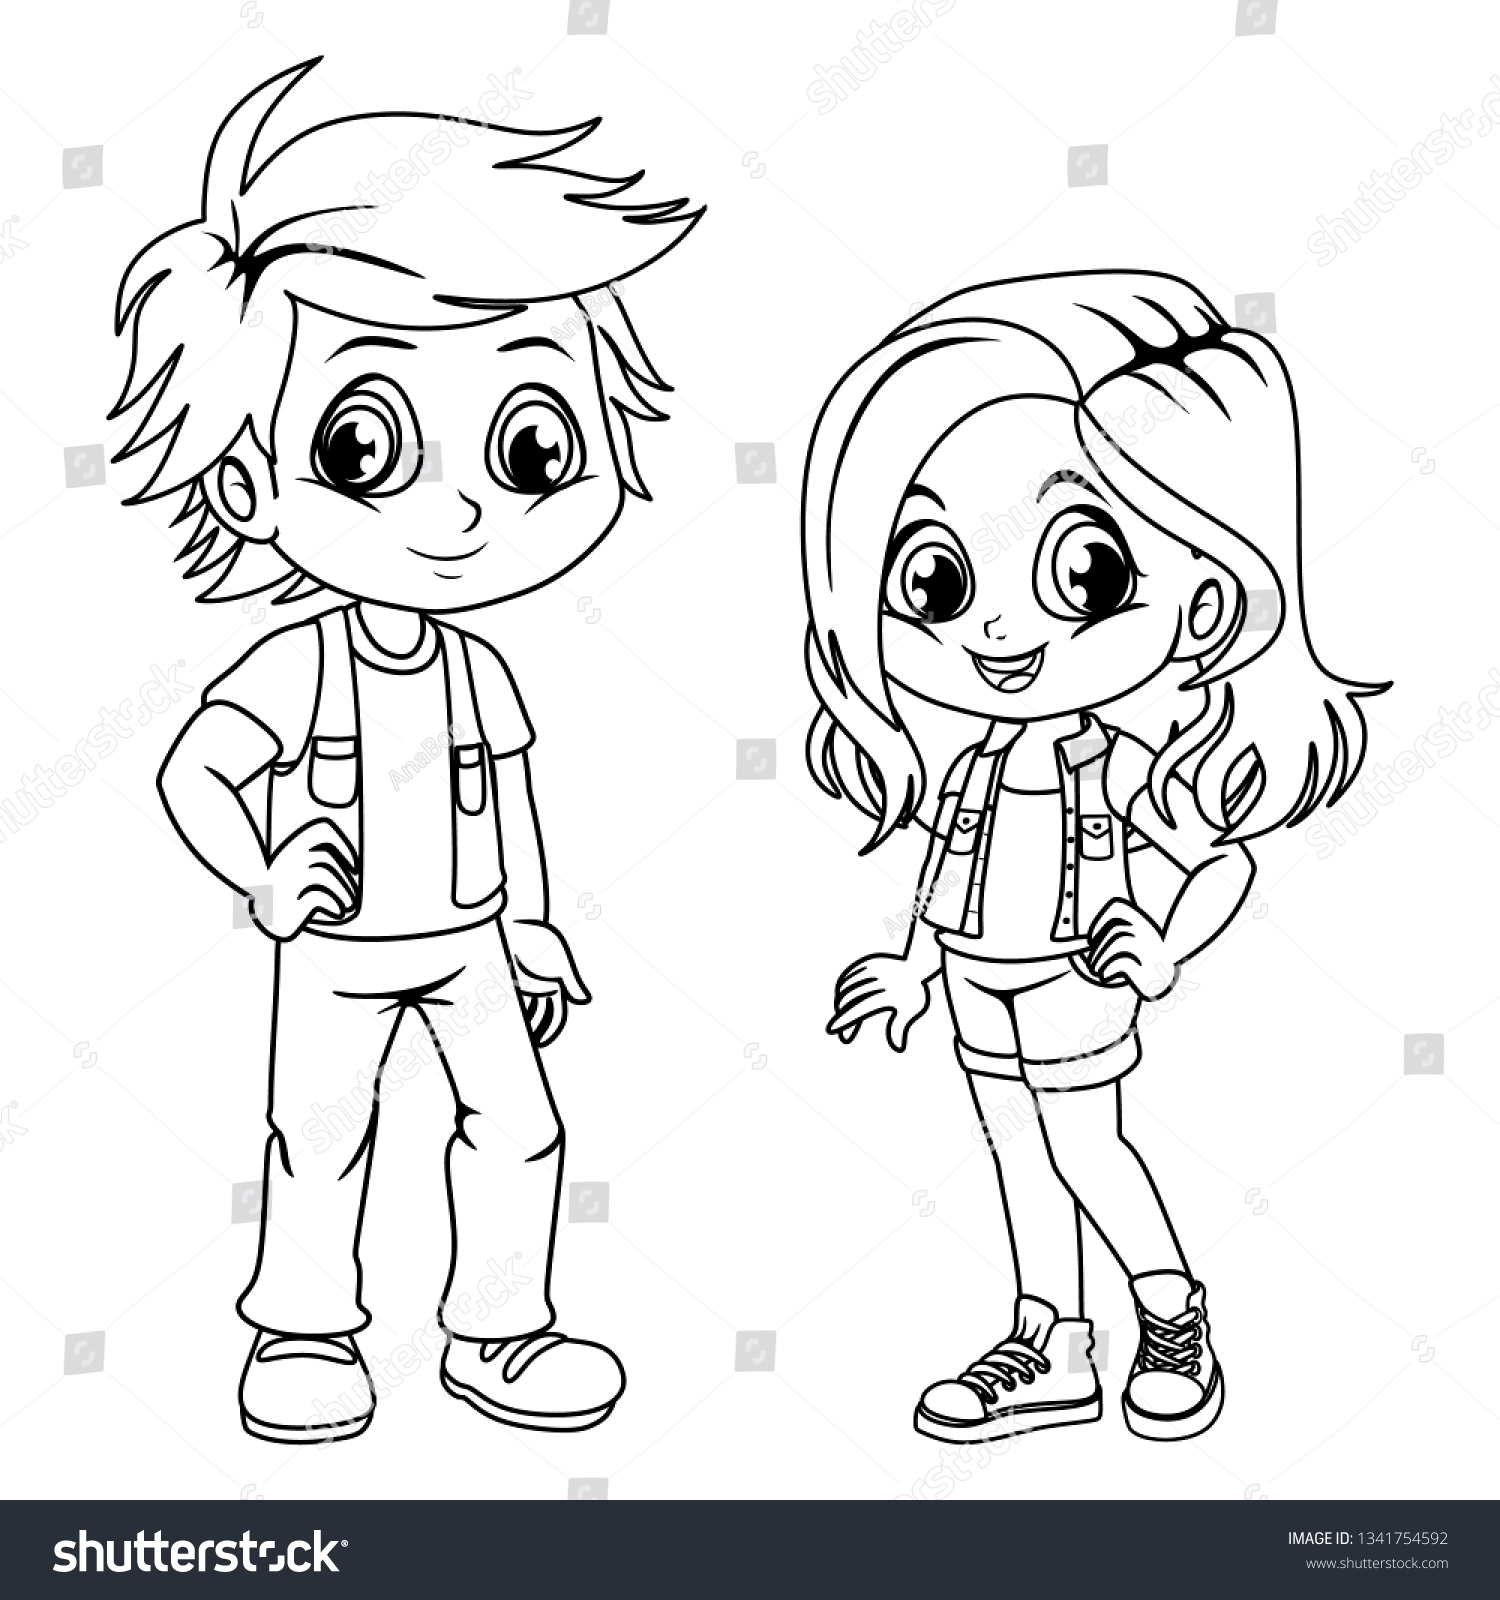 Coloring Pages Cute Cartoon Boy Girl Stock Vector Royalty Free ...